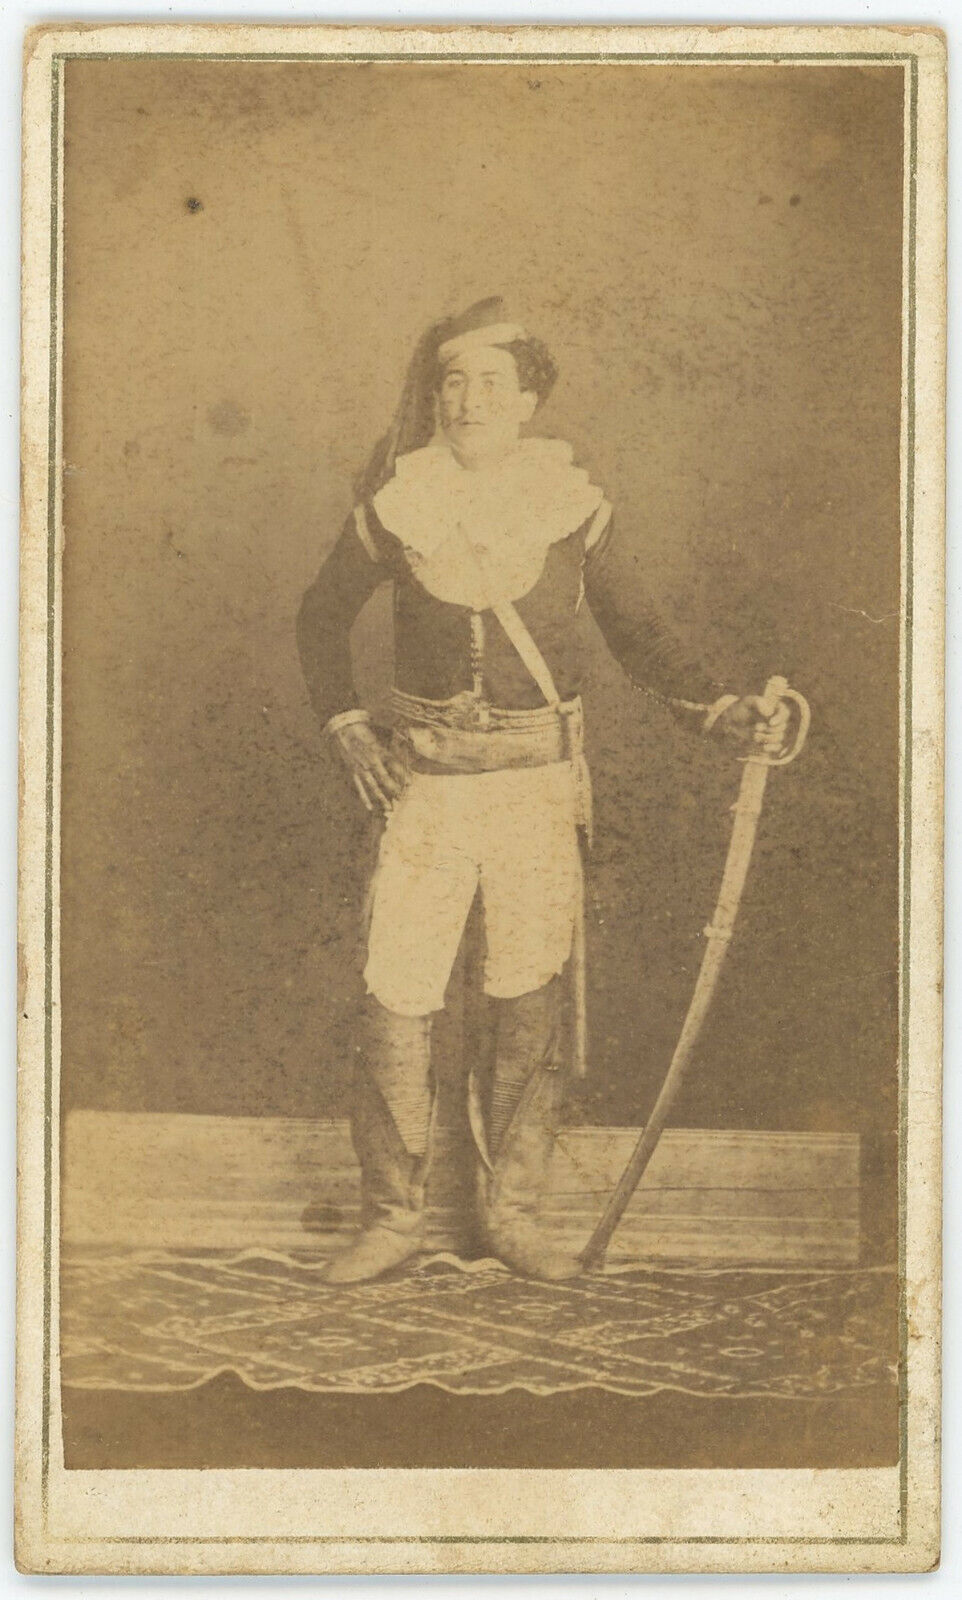 CDV circa 1870-80. Portrait of a Soldier. Hunter of Africa? African Army